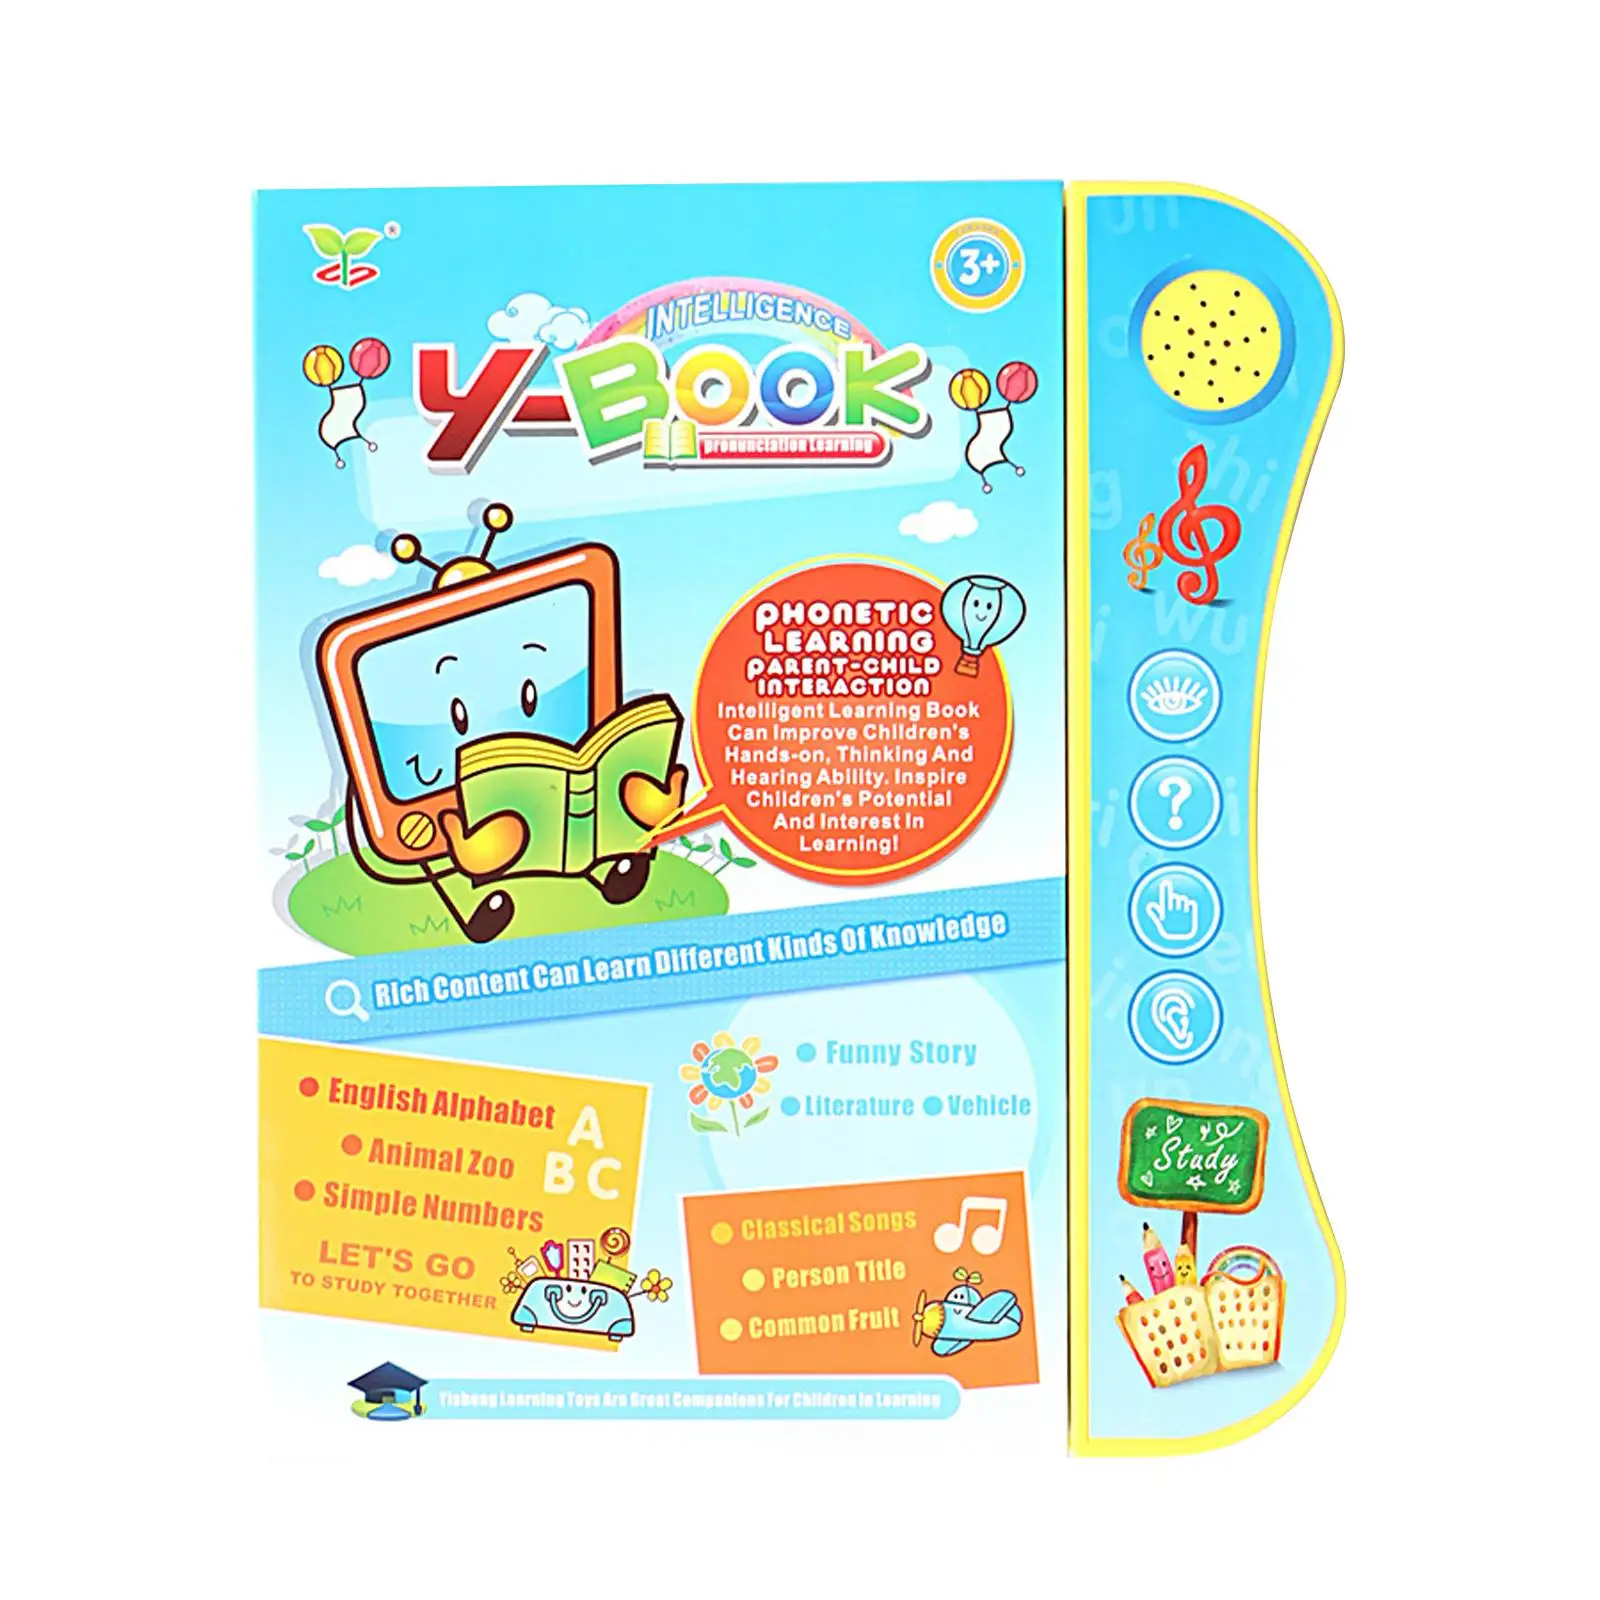 sound book for Baby Multipurpose Interactive Gift English Talking sound book for Number Language Animal Character Appellation